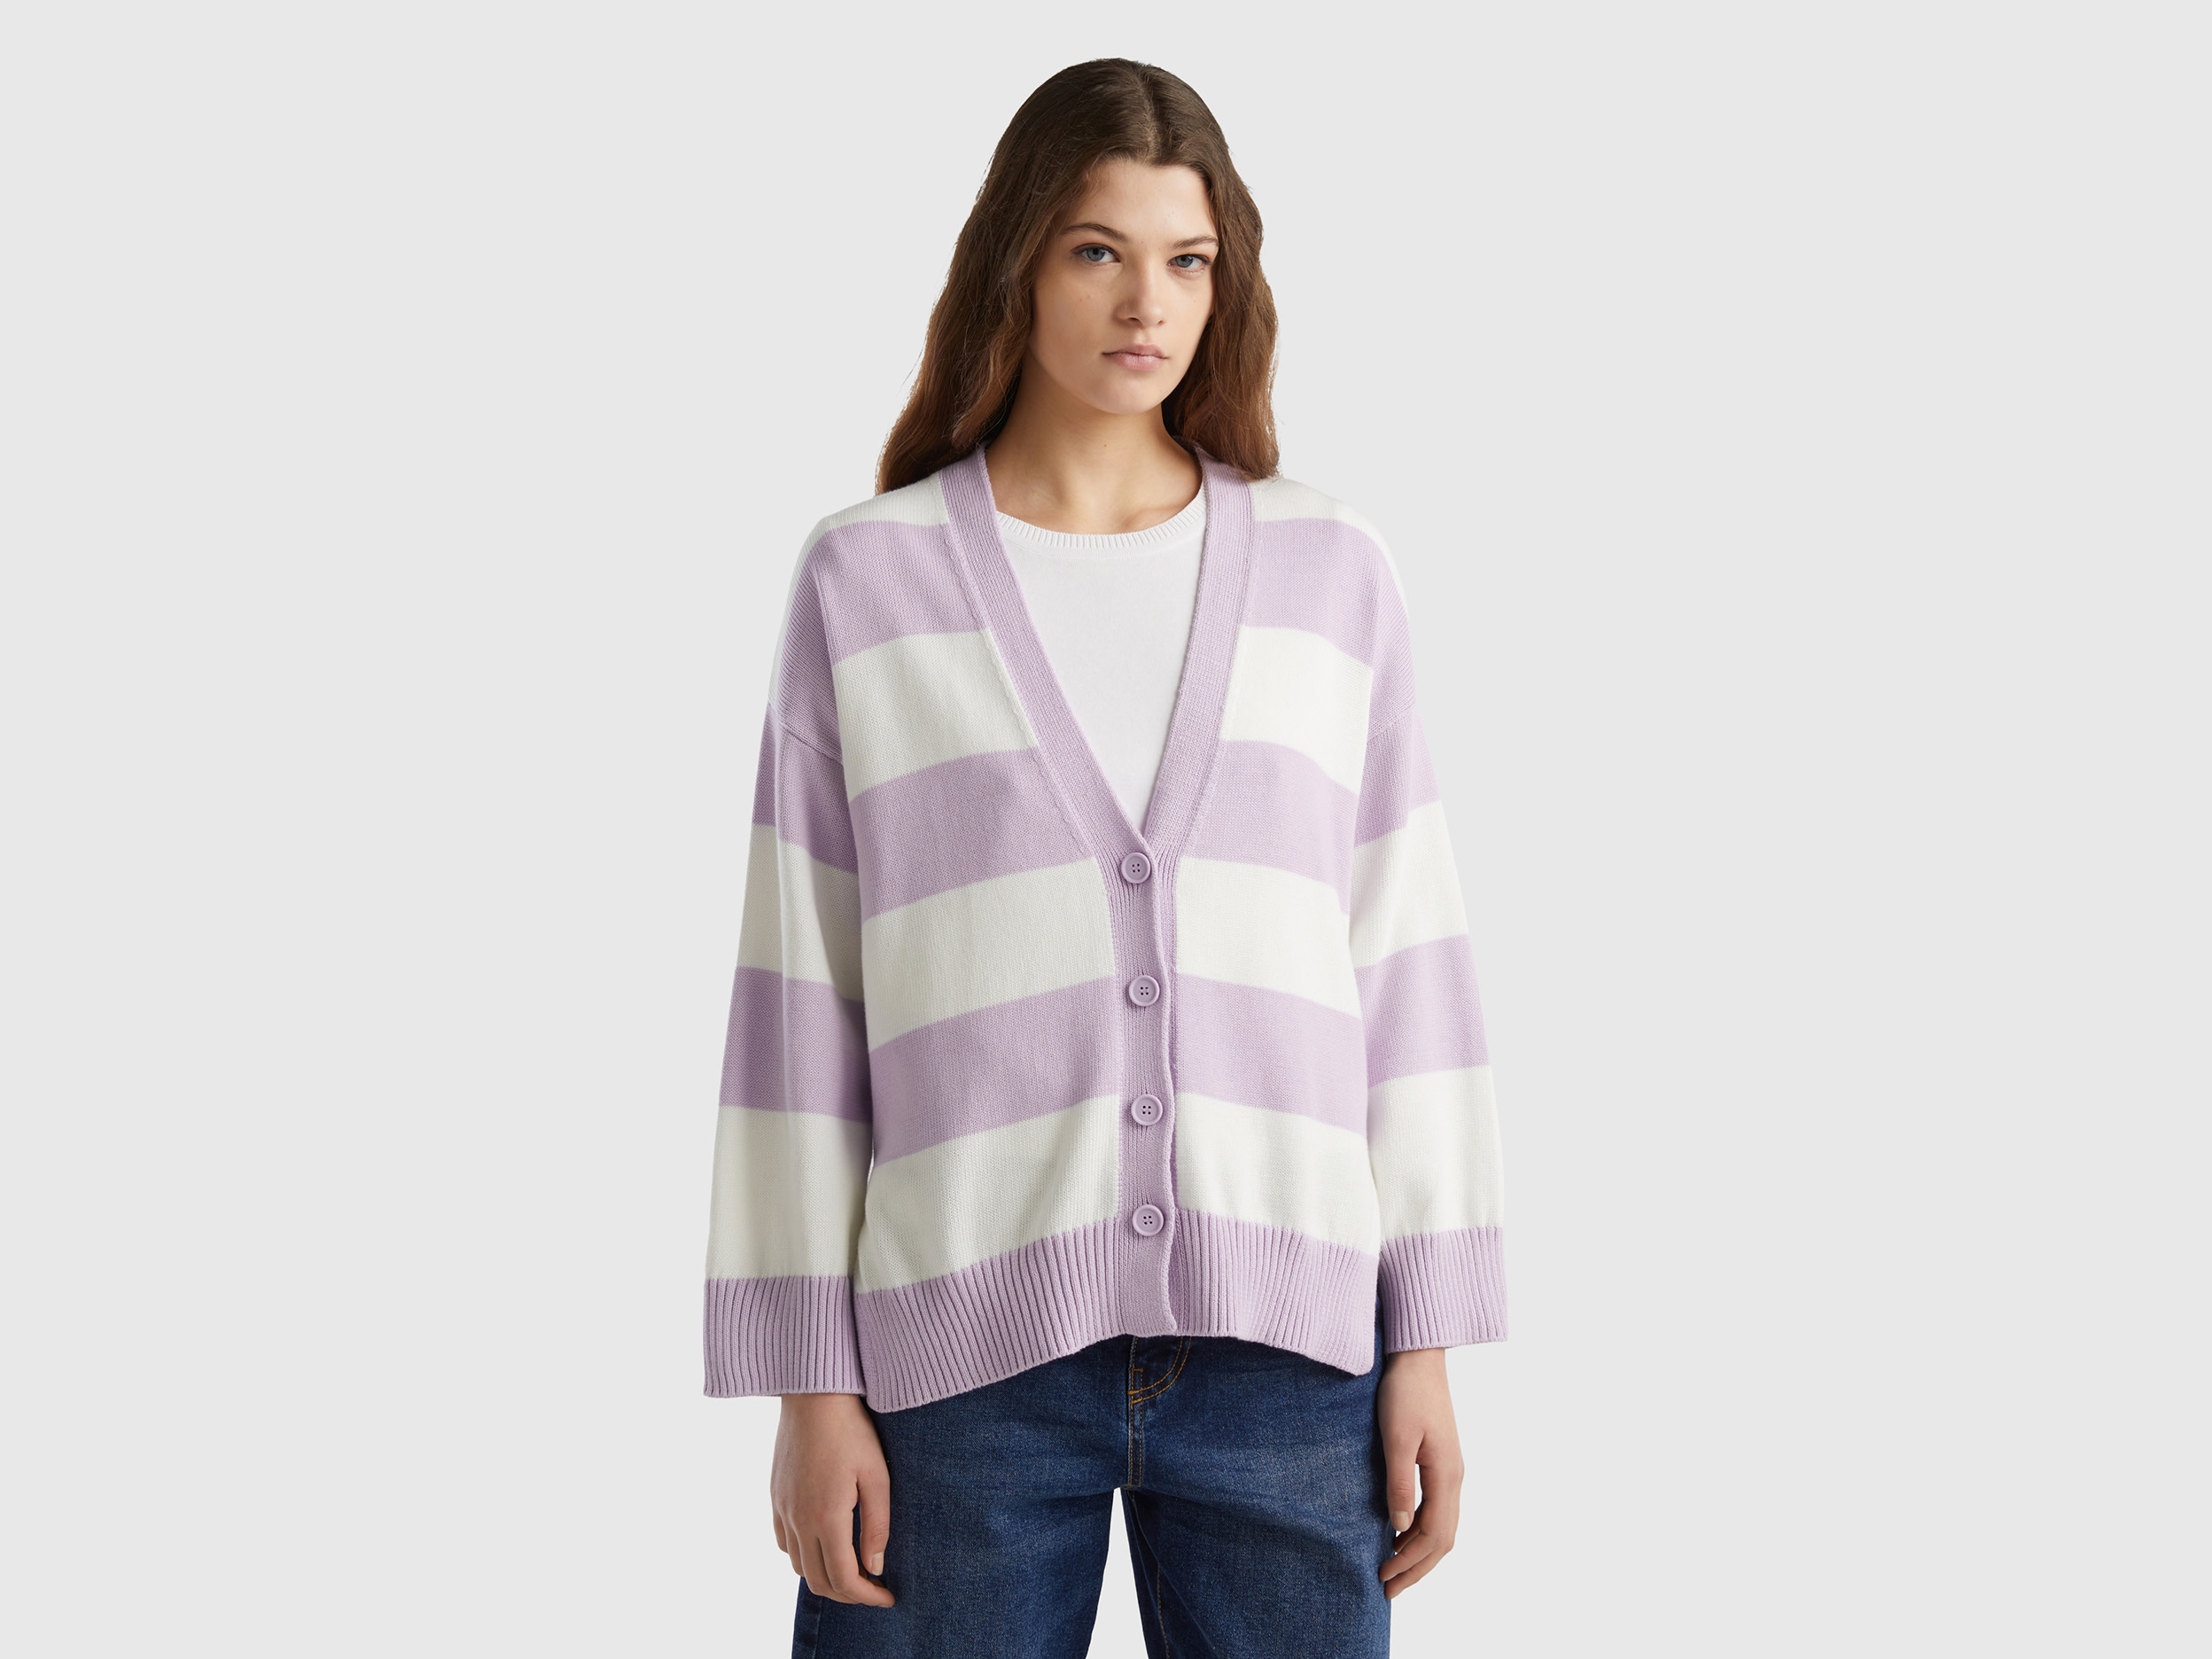 Benetton, Striped Cardigan In Tricot Cotton, size XS, Lilac, Women